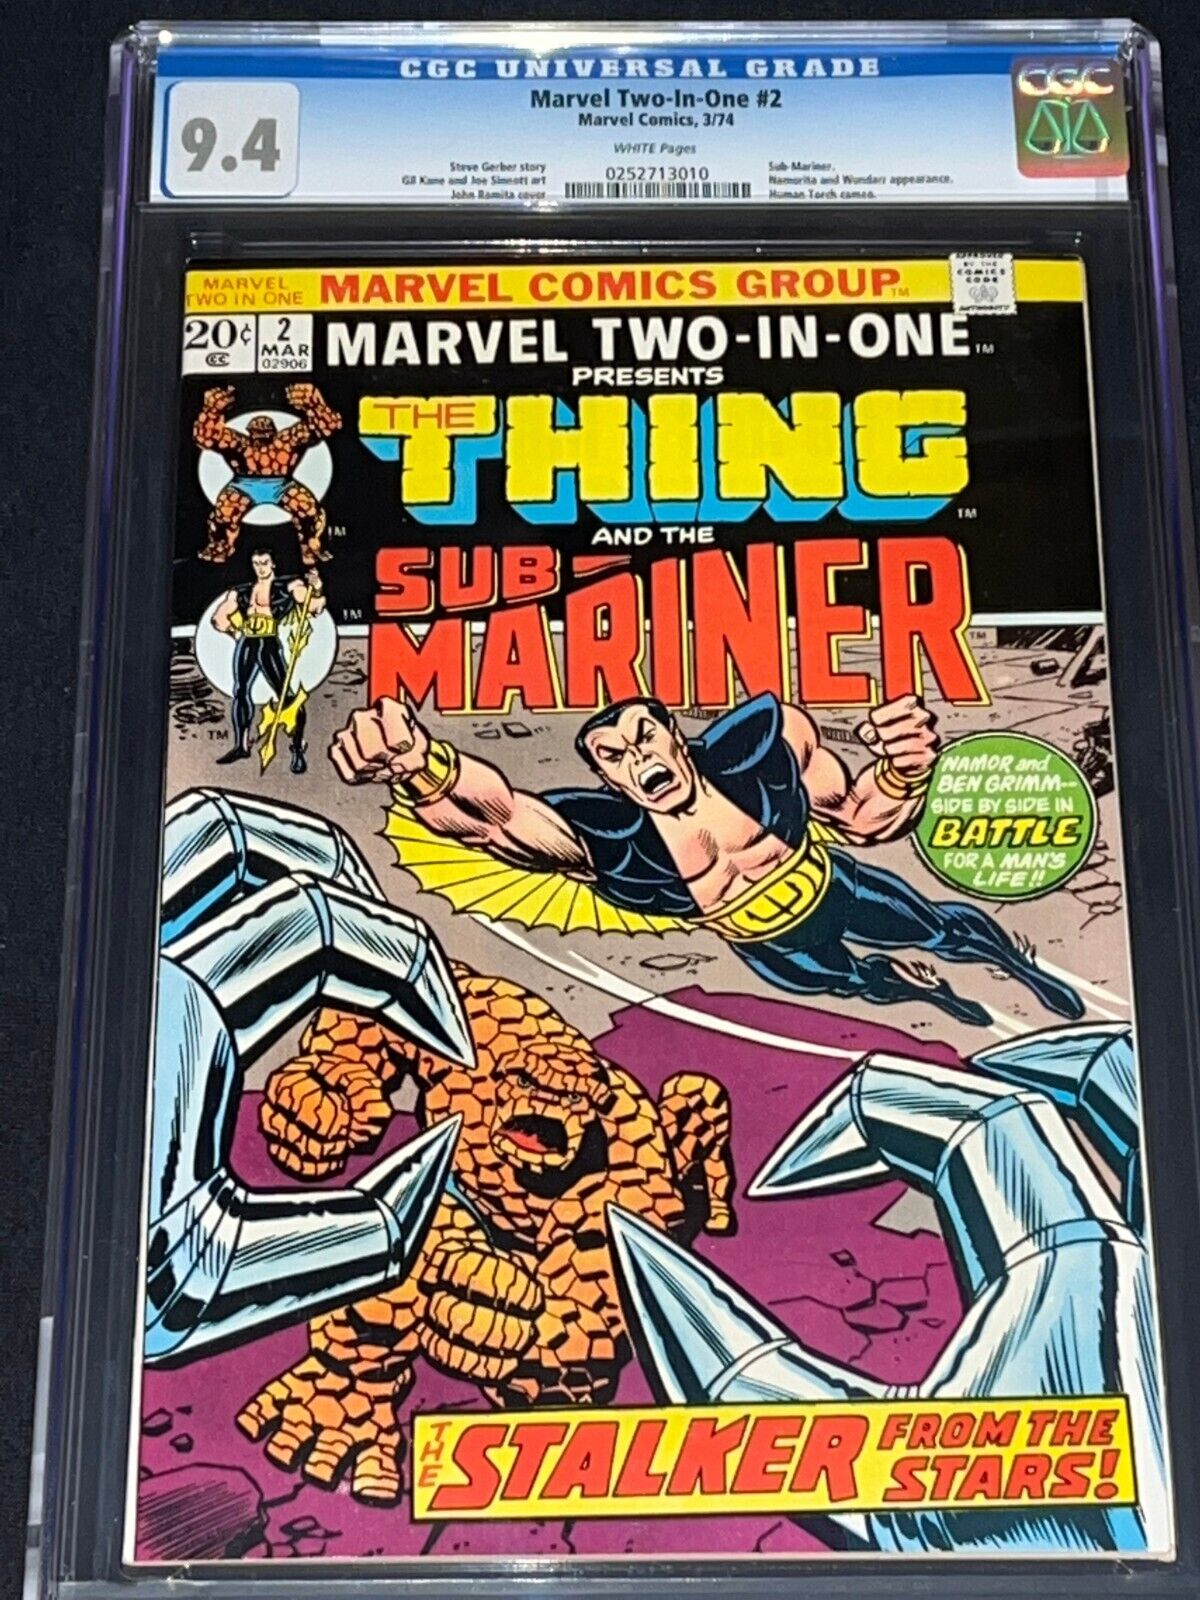 Marvel Two-In-One #2 CGC 9.4 - Sub-Mariner Appearance - 1974